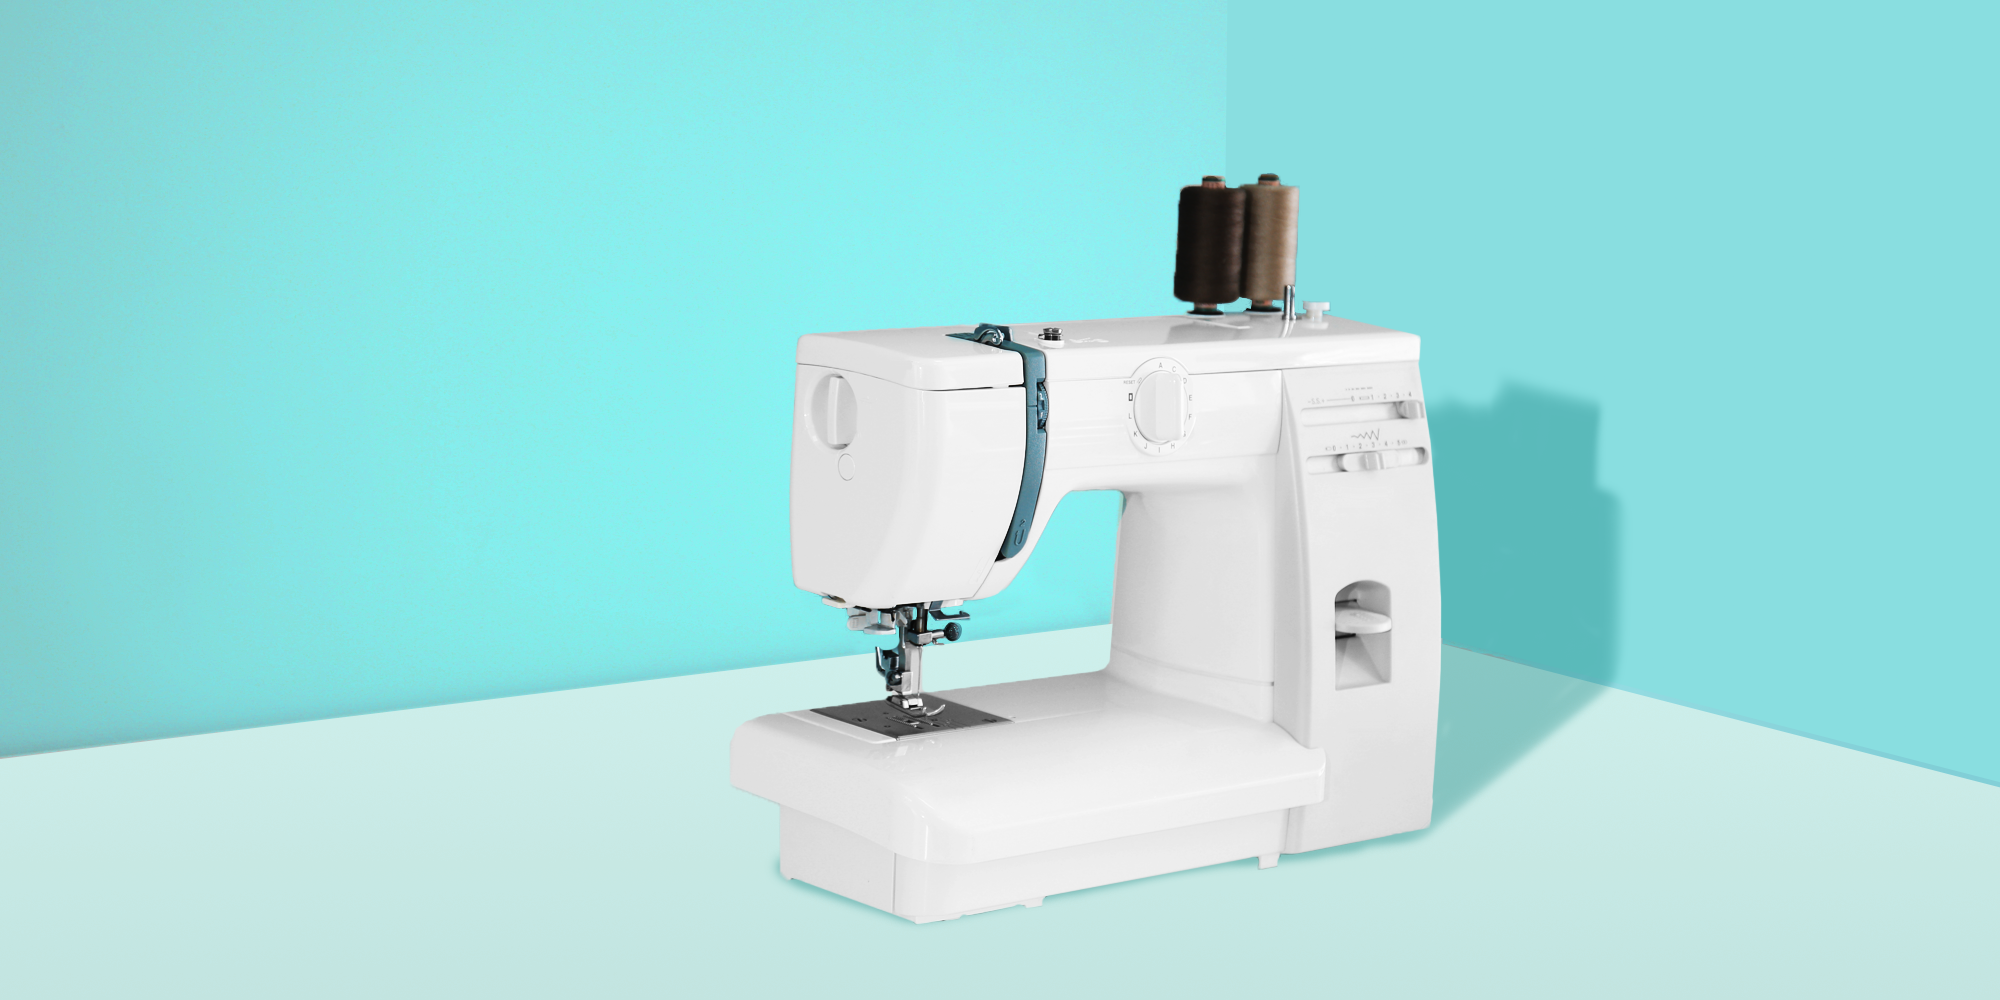 making money with used sewing machines